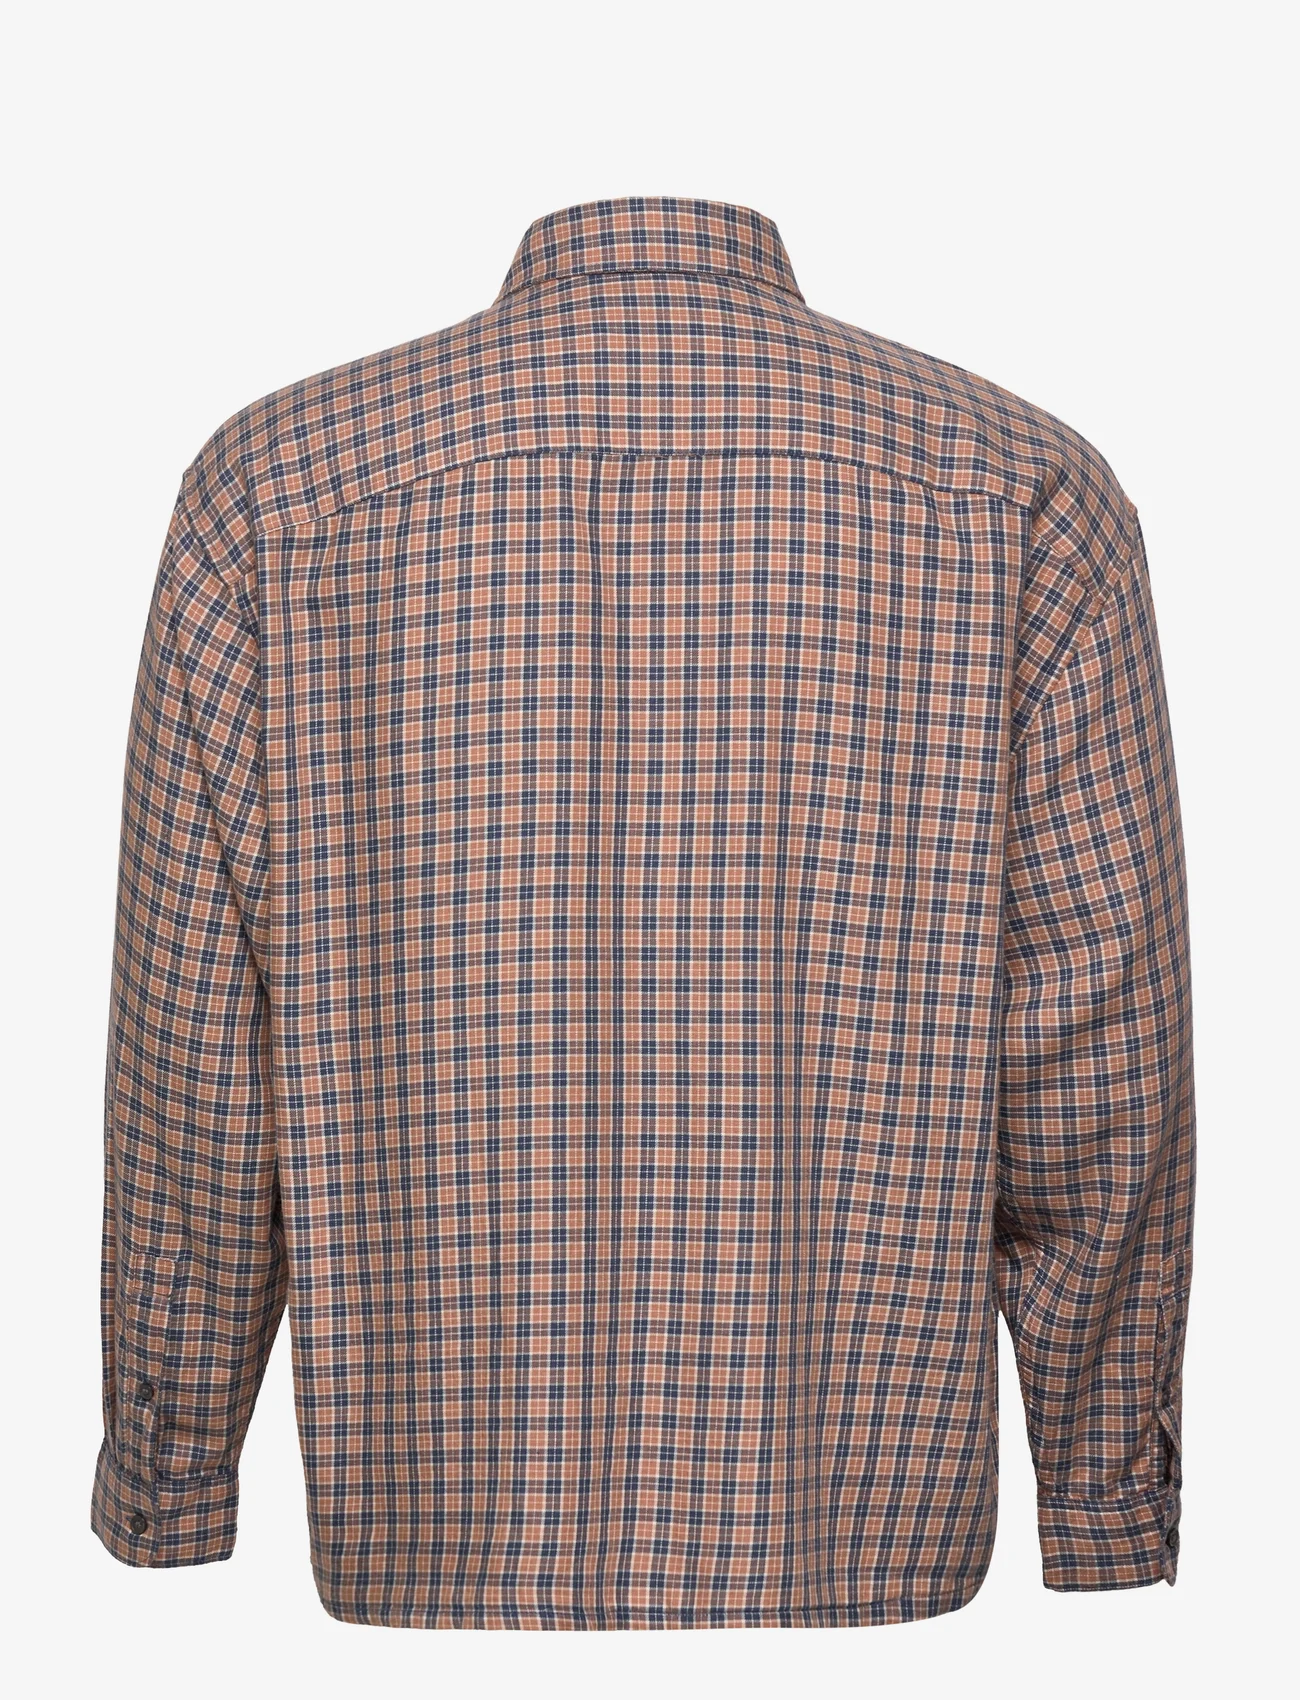 Abercrombie & Fitch - ANF MENS WOVENS - ruutupaidat - burg check - 1